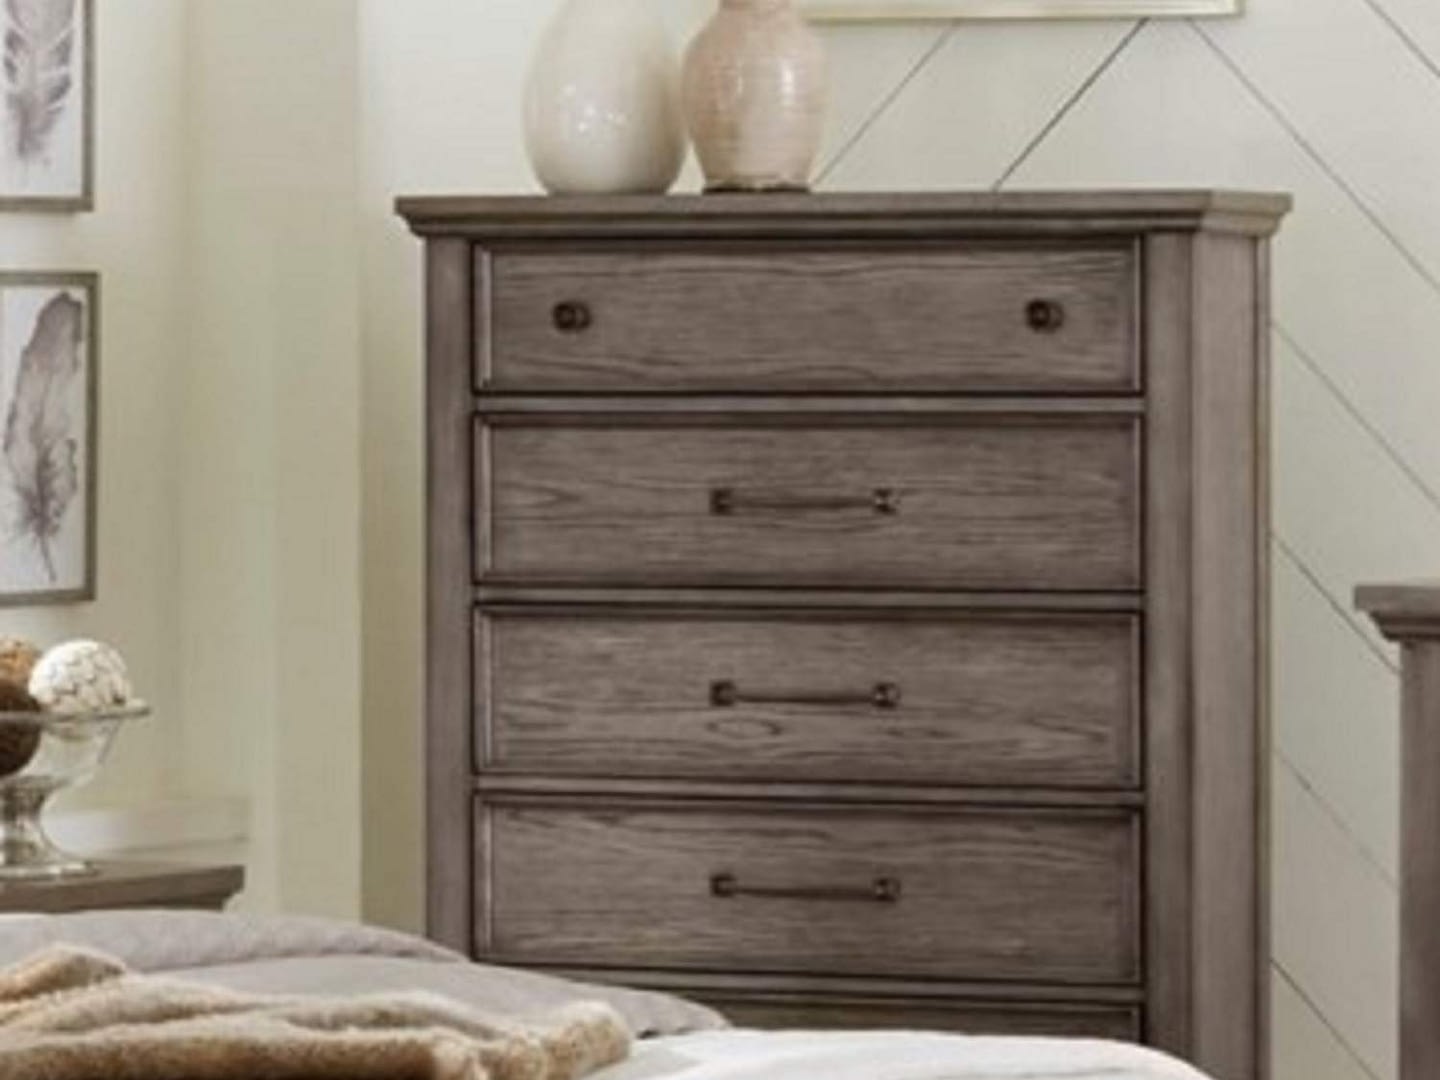 LEO Chest of Drawers